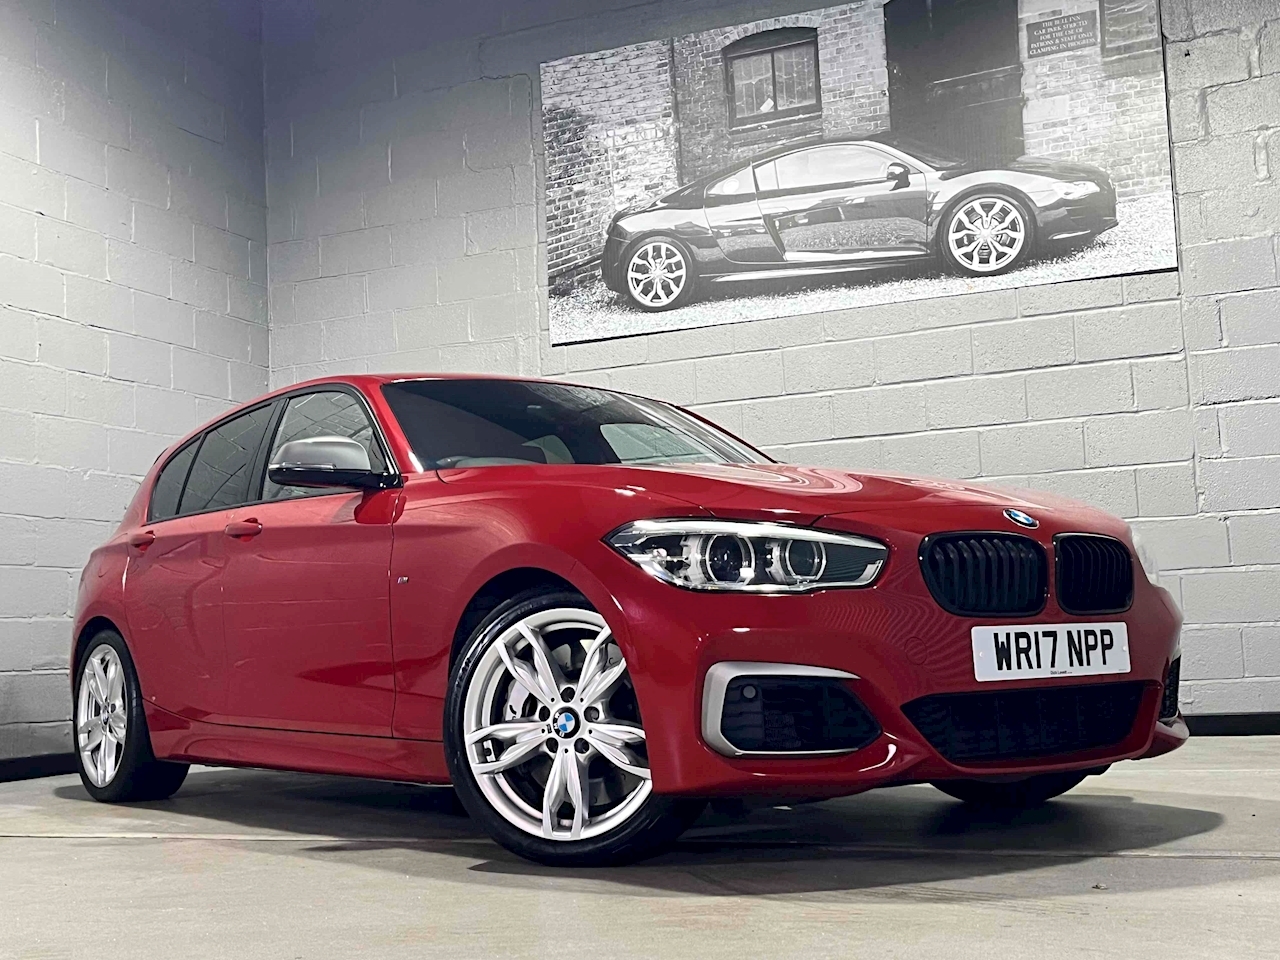 Used BMW 1 Series review - ReDriven